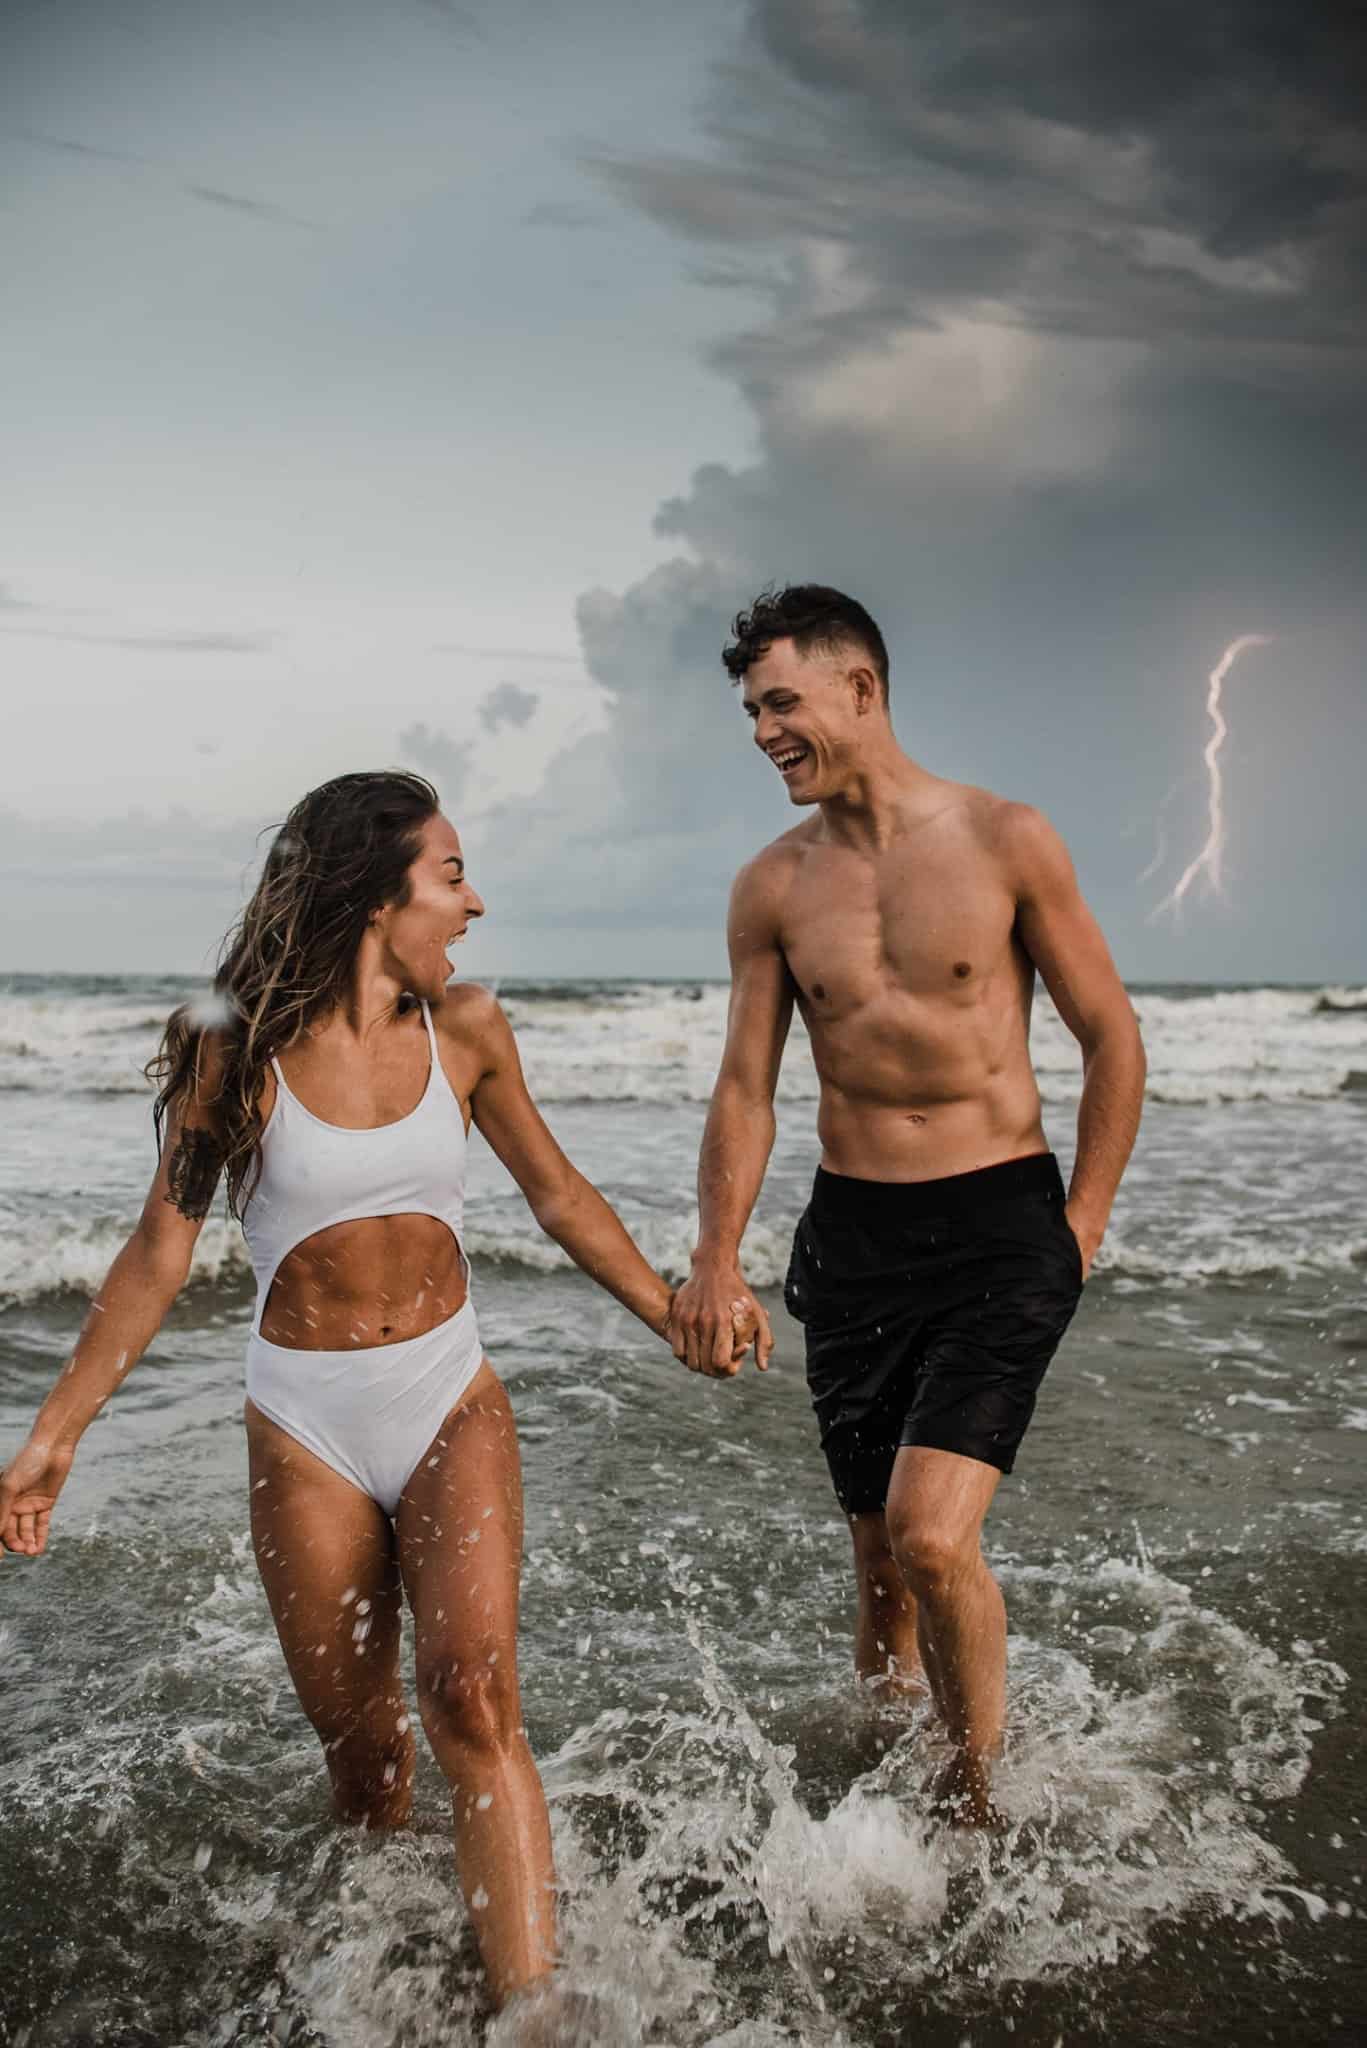 Man and woman holding hands in splashing seas water, looking at each other smiling. Lighting strike in background